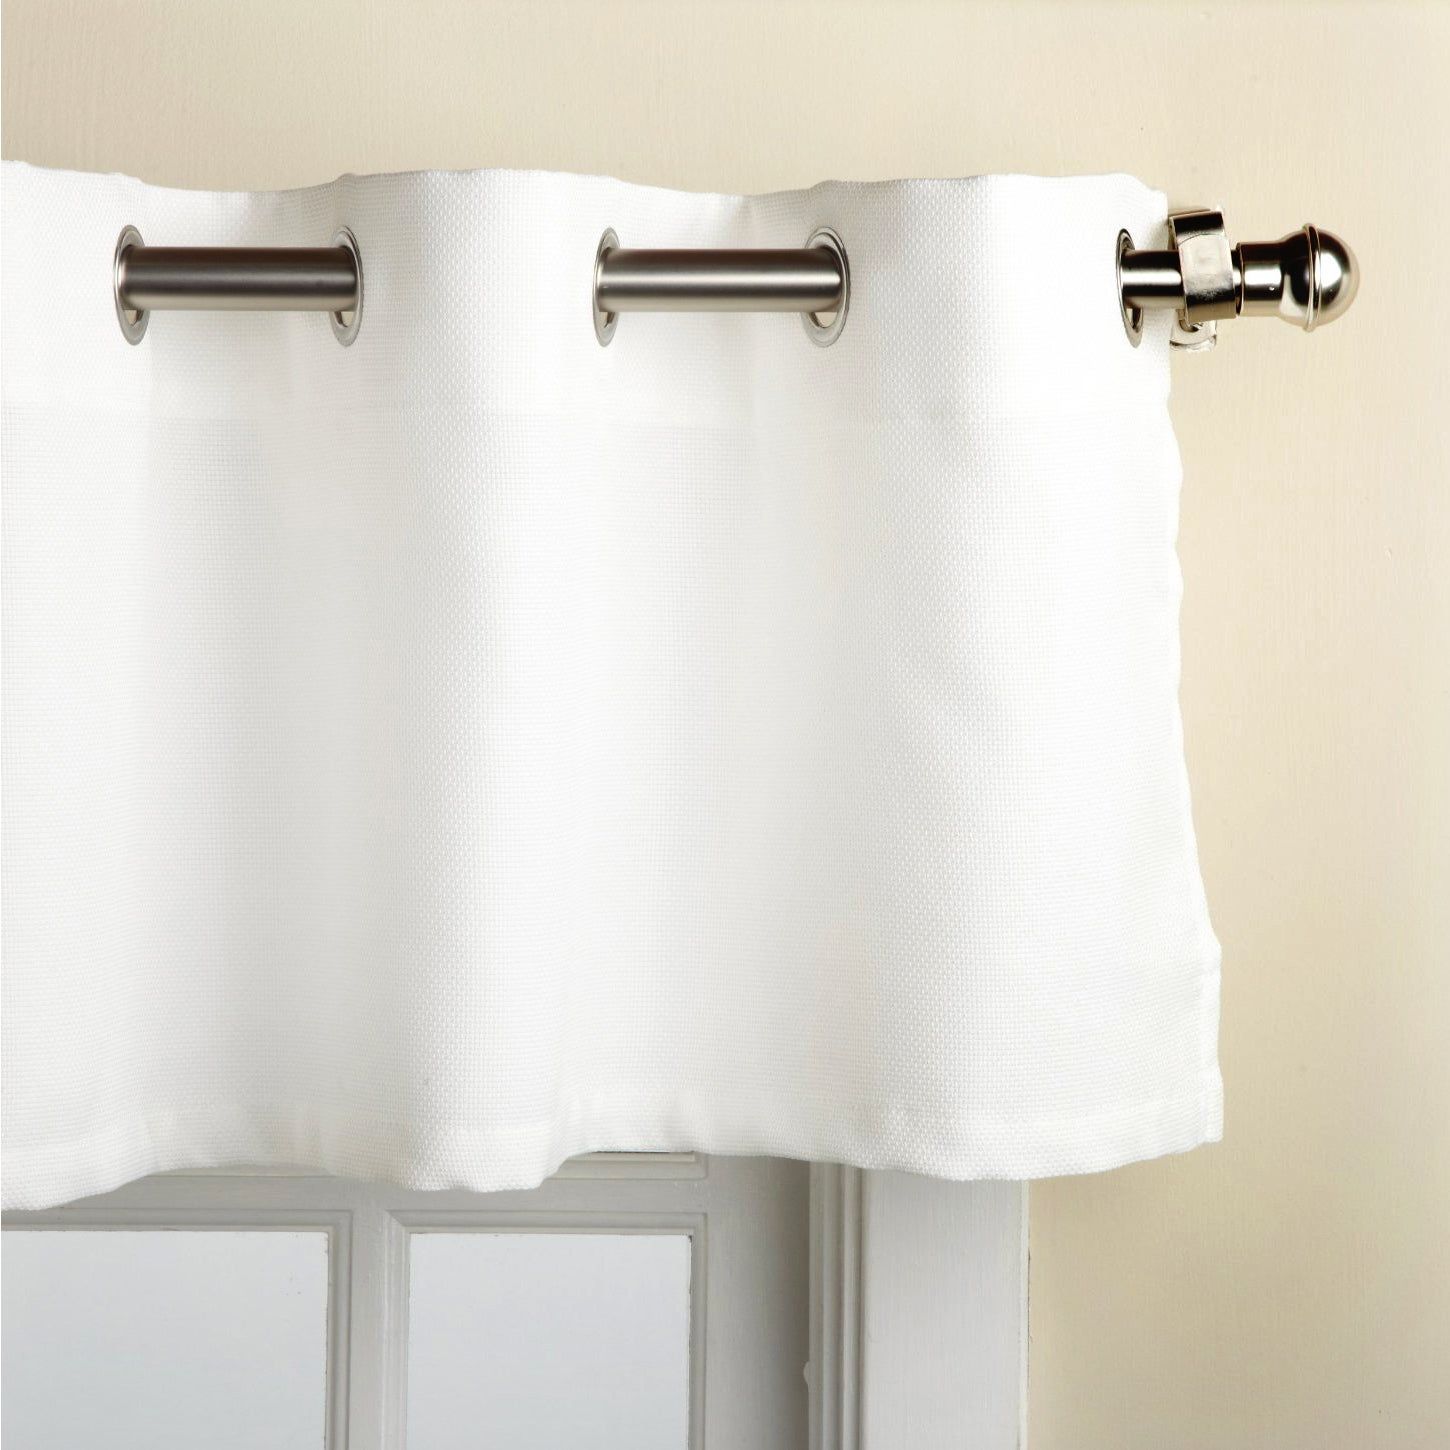 Modern Subtle Texture Solid White Kitchen Curtain Parts With Grommets  Tier  And Valance Options With Regard To Modern Subtle Texture Solid White Kitchen Curtain Parts With Grommets Tier And Valance Options (View 5 of 20)